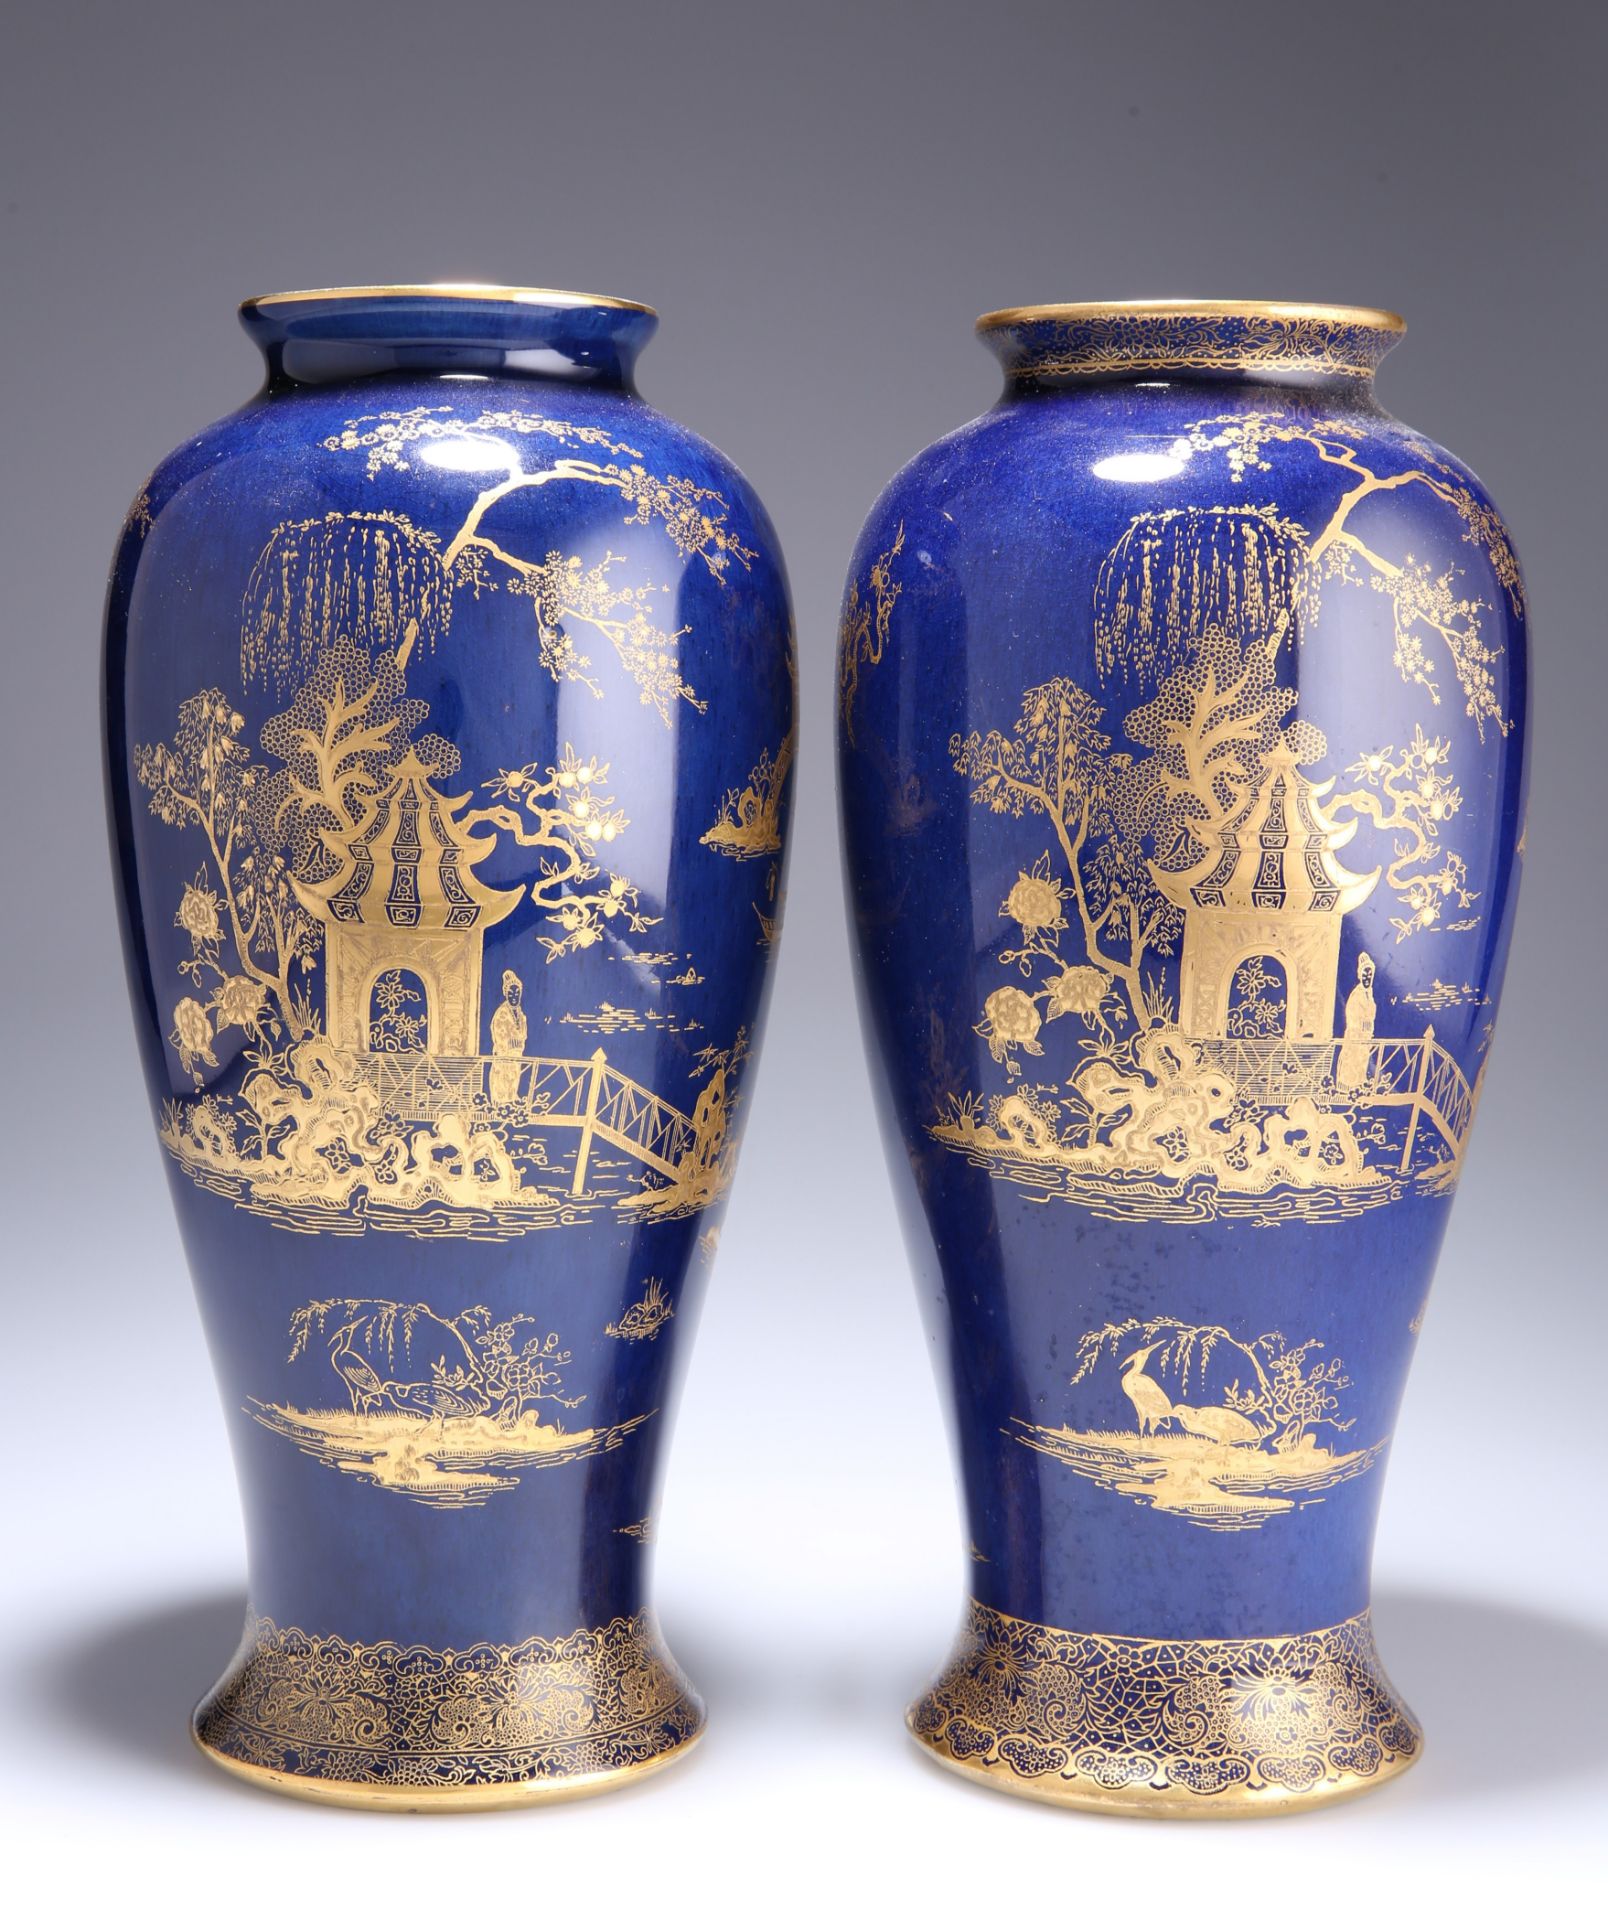 A PAIR OF 1920'S CARLTON WARE 'NEW MIKADO' VASES - Image 2 of 2